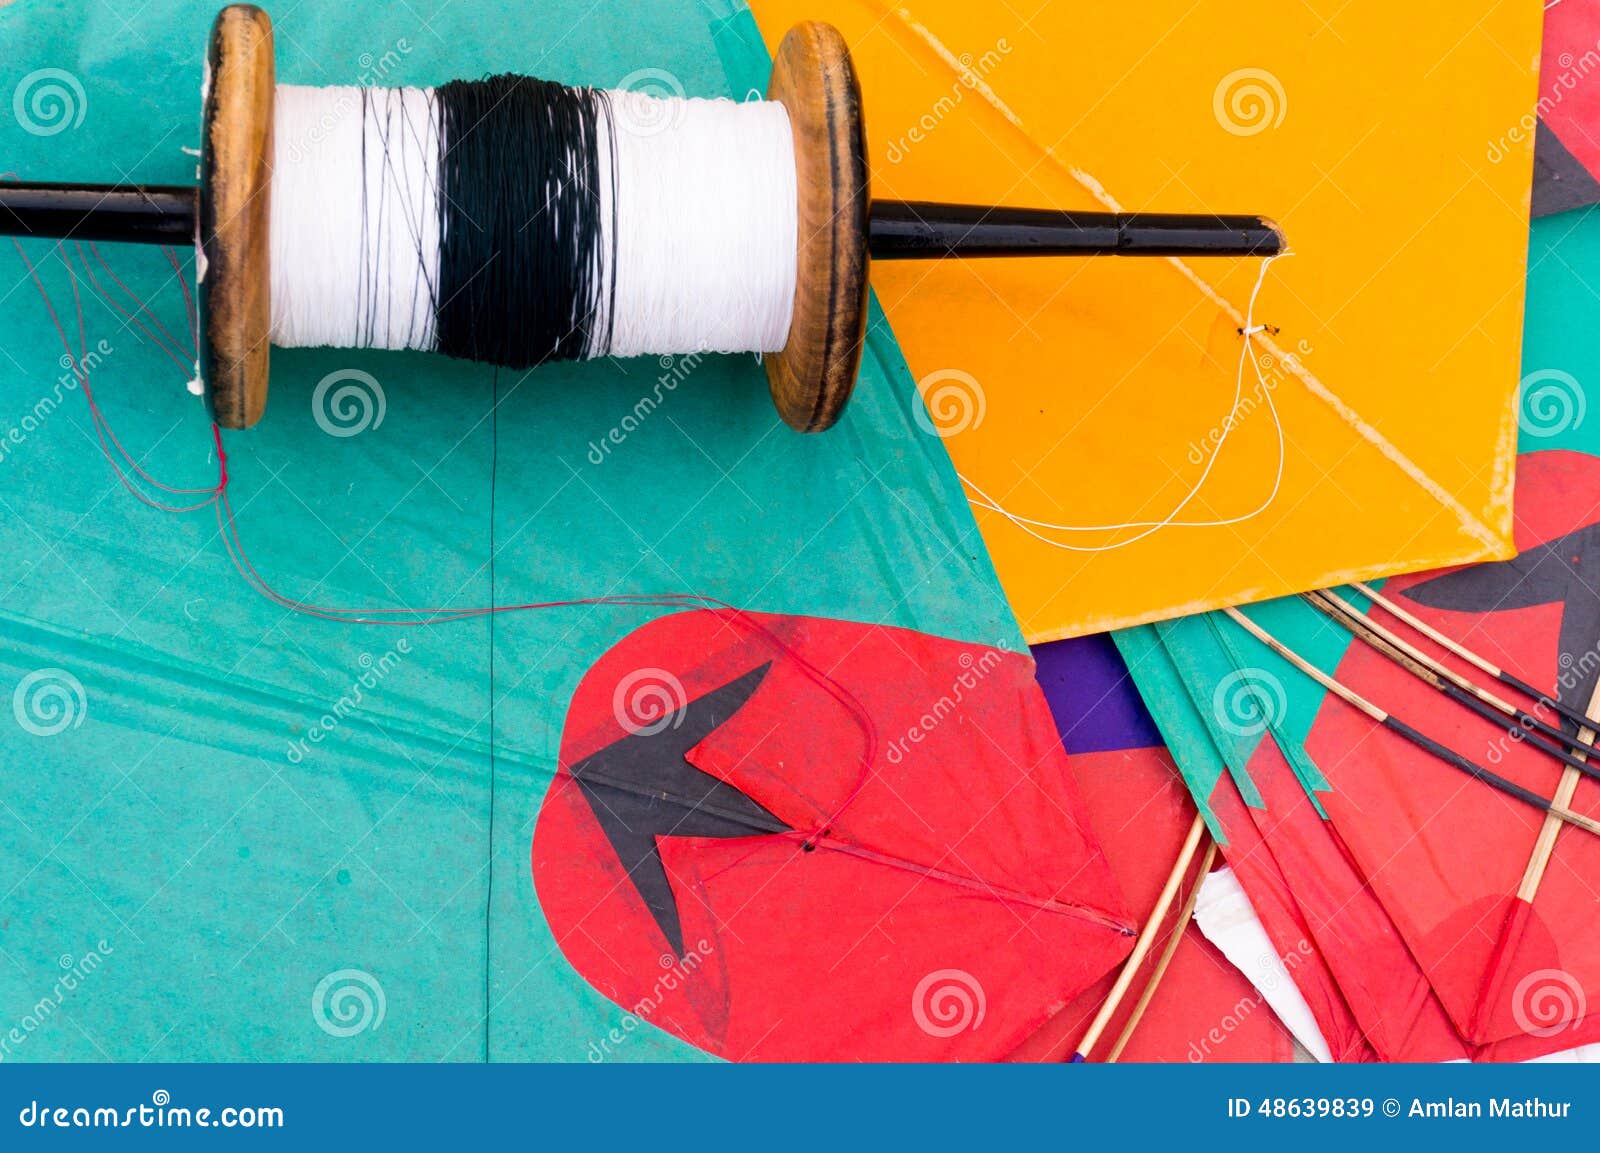 Colorful Indian Kites and String Stock Image - Image of glass